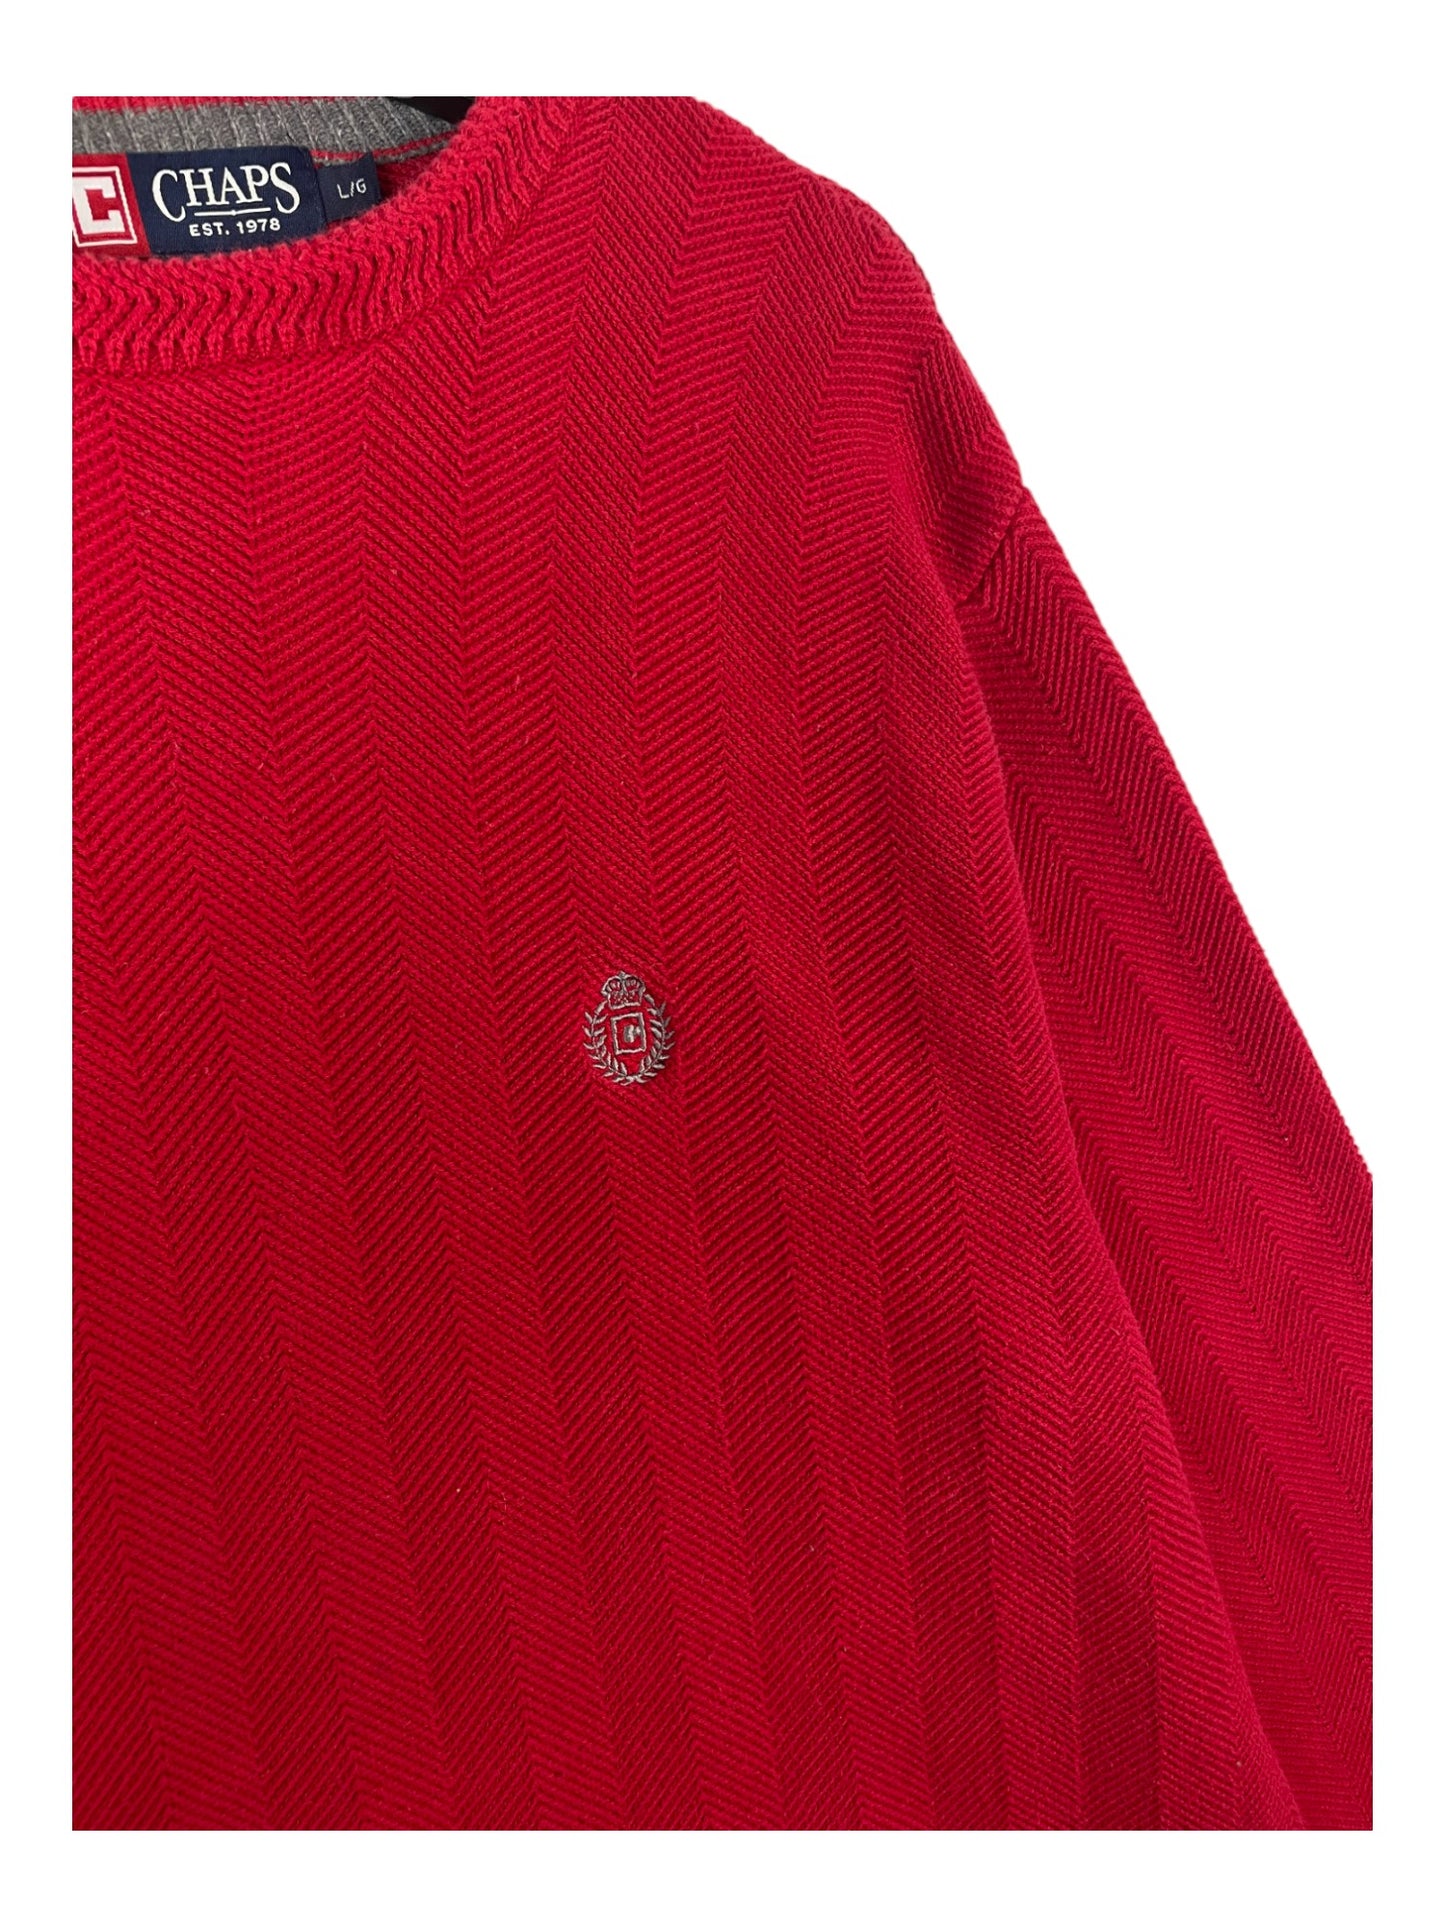 Chaps Red Knit